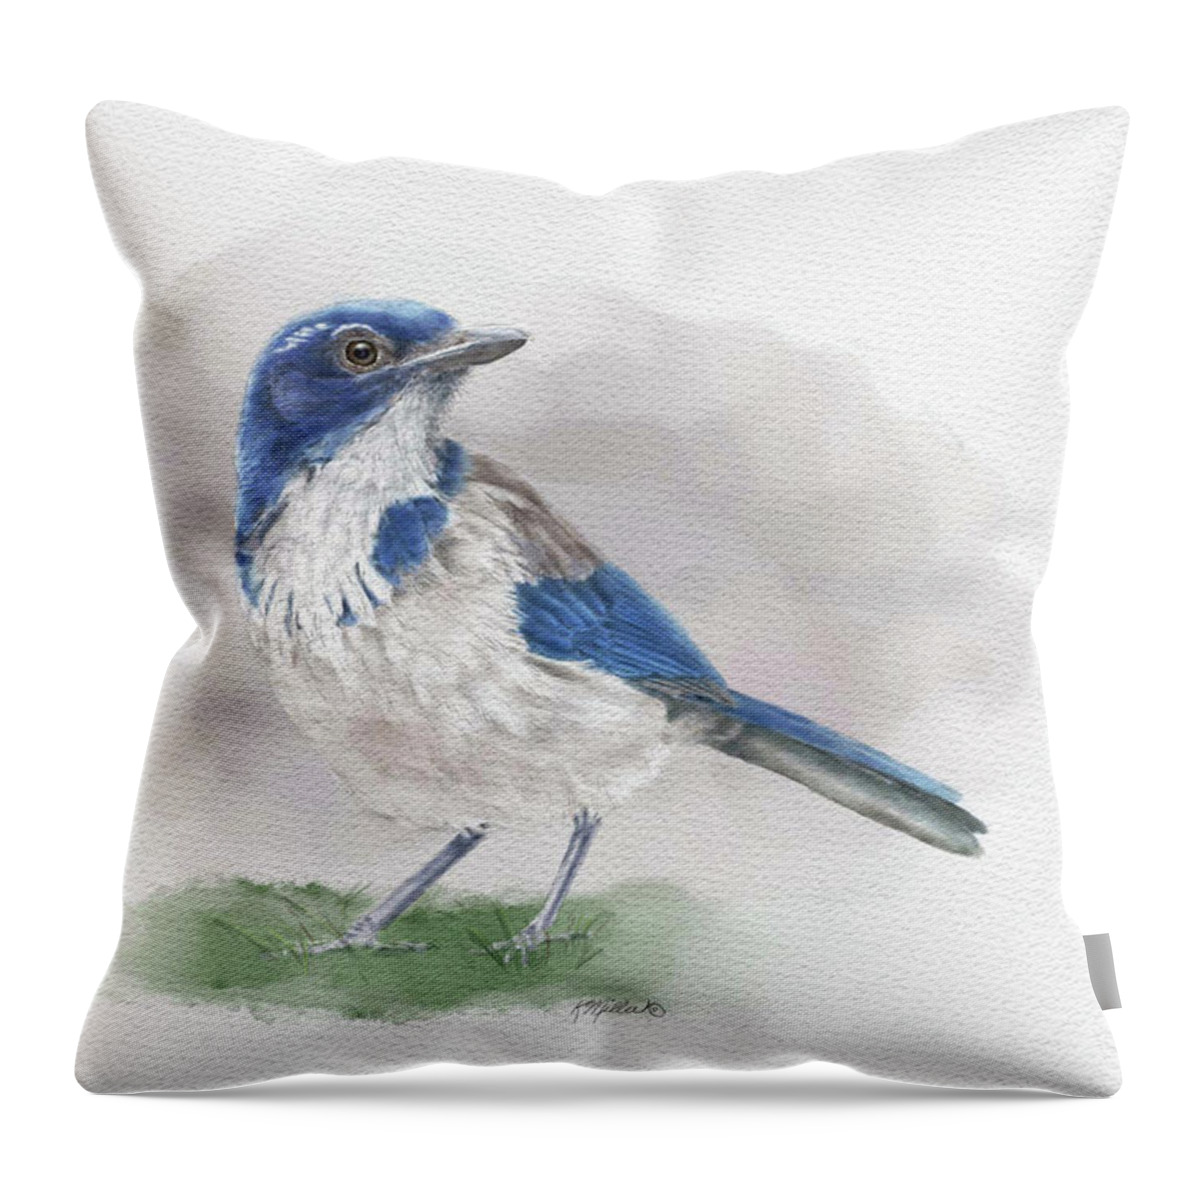 Scrub Jay Throw Pillow featuring the painting Scrub Jay by Kathie Miller